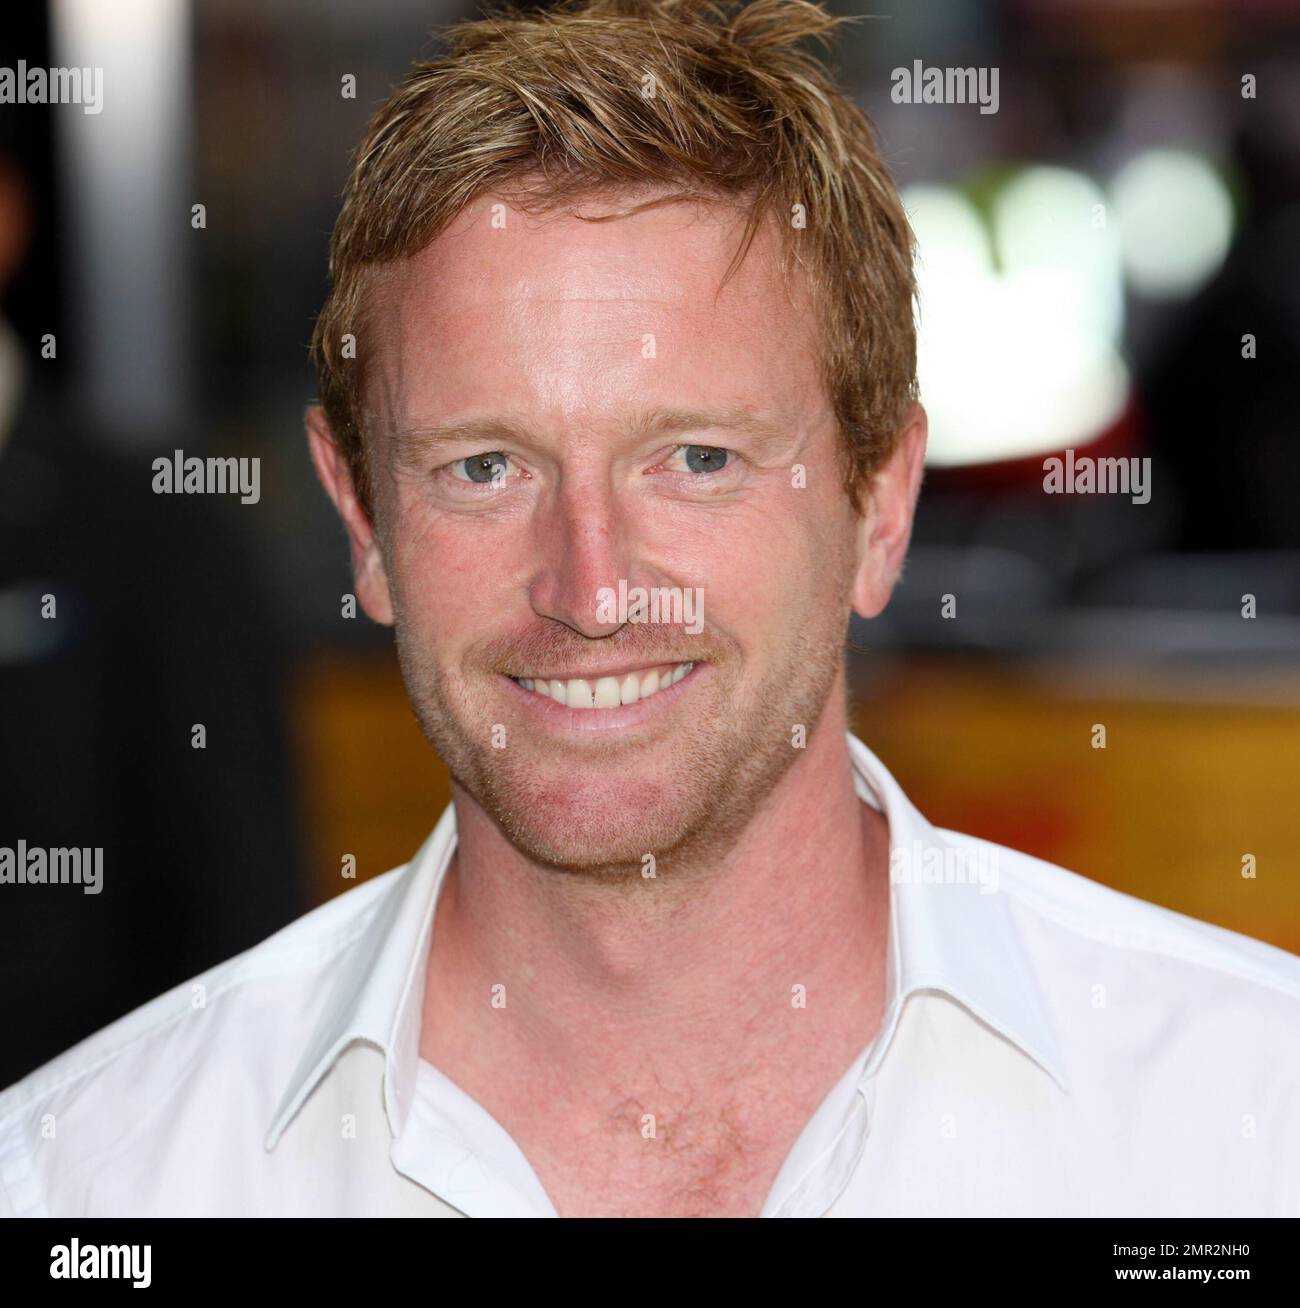 Paul Collingwood at the European premiere of 'Fire in Babylon' at Odeon Leicester Square. London, UK. 5/9/11. Stock Photo